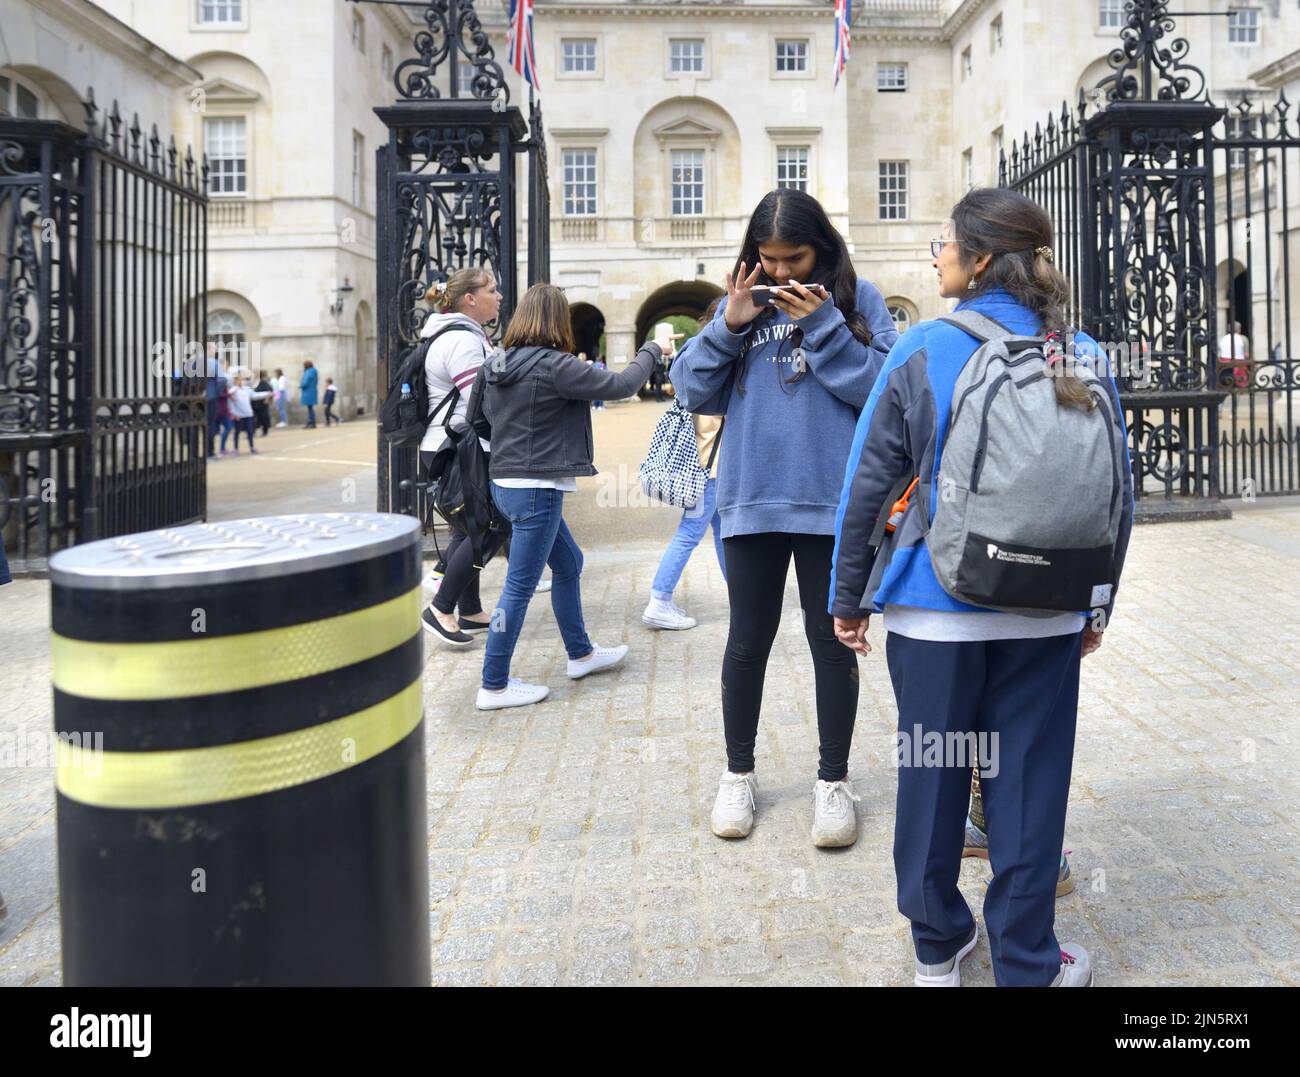 London, England, UK. Girl looking at her mobile phone outside Horse Guards Parade in Whitehall Stock Photo